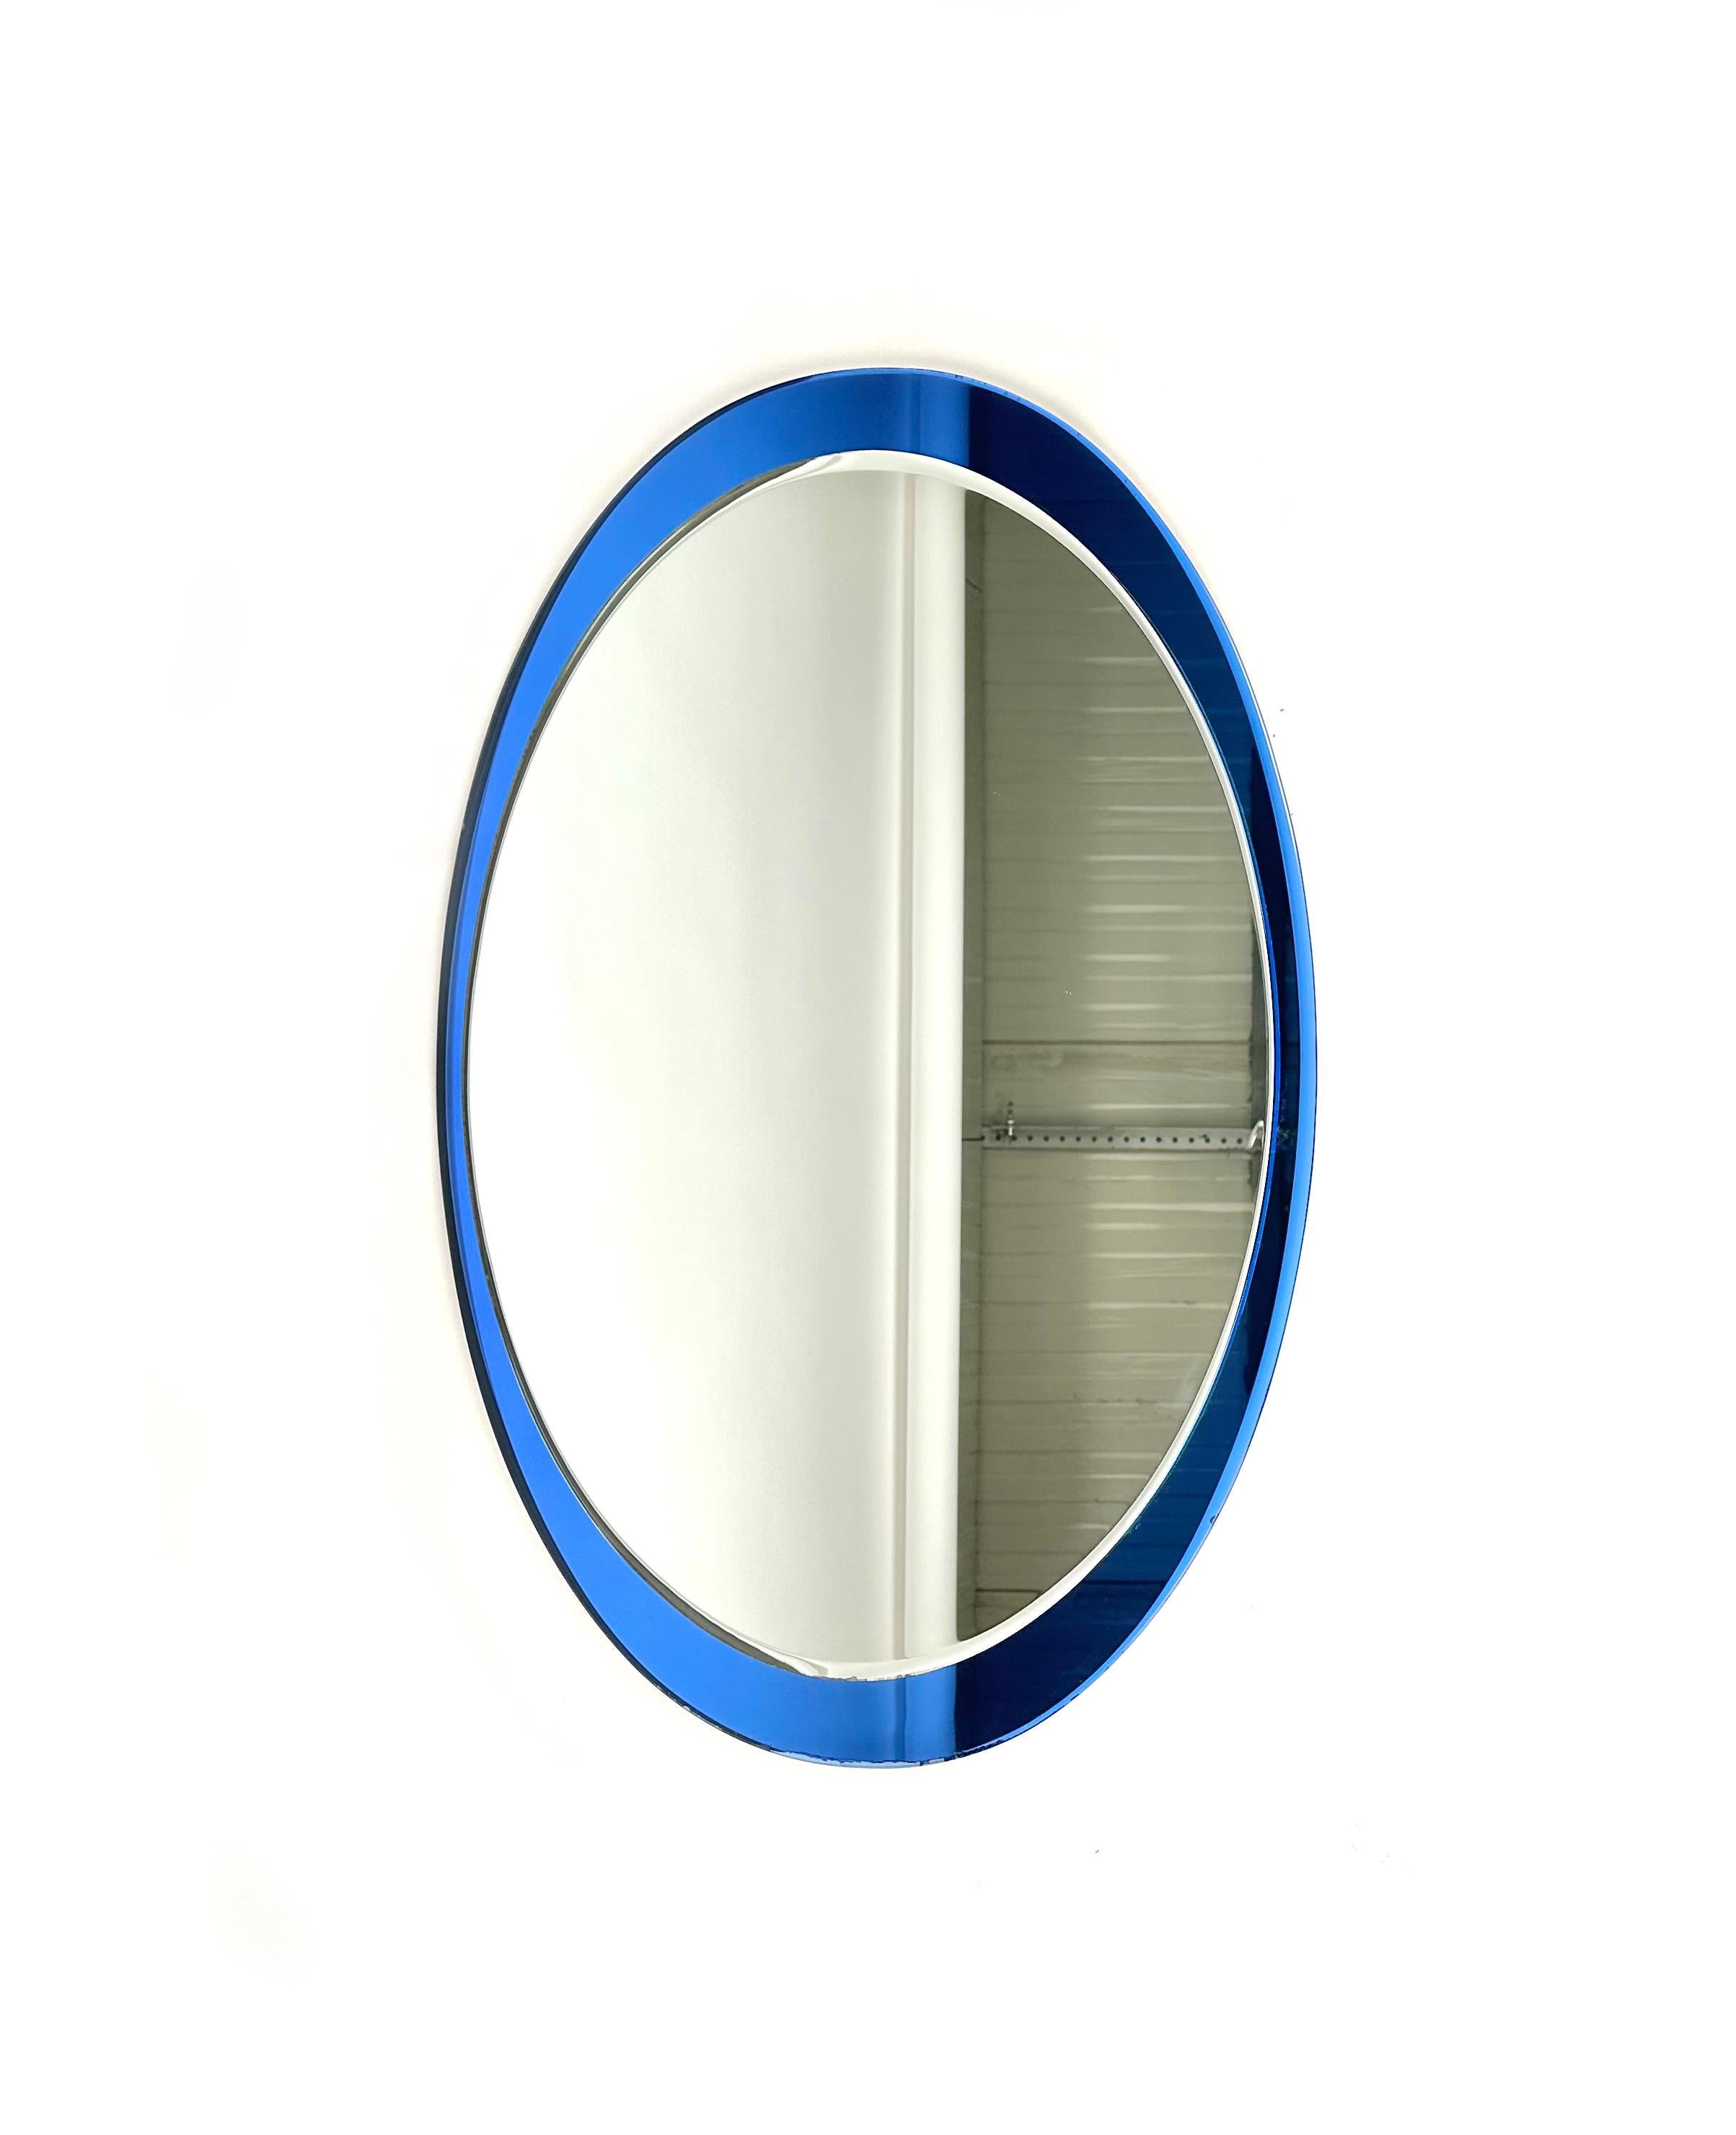 Late 20th Century Midcentury Oval Blue Wall Mirror by Metalvetro Galvorame, Italy, 1970s For Sale